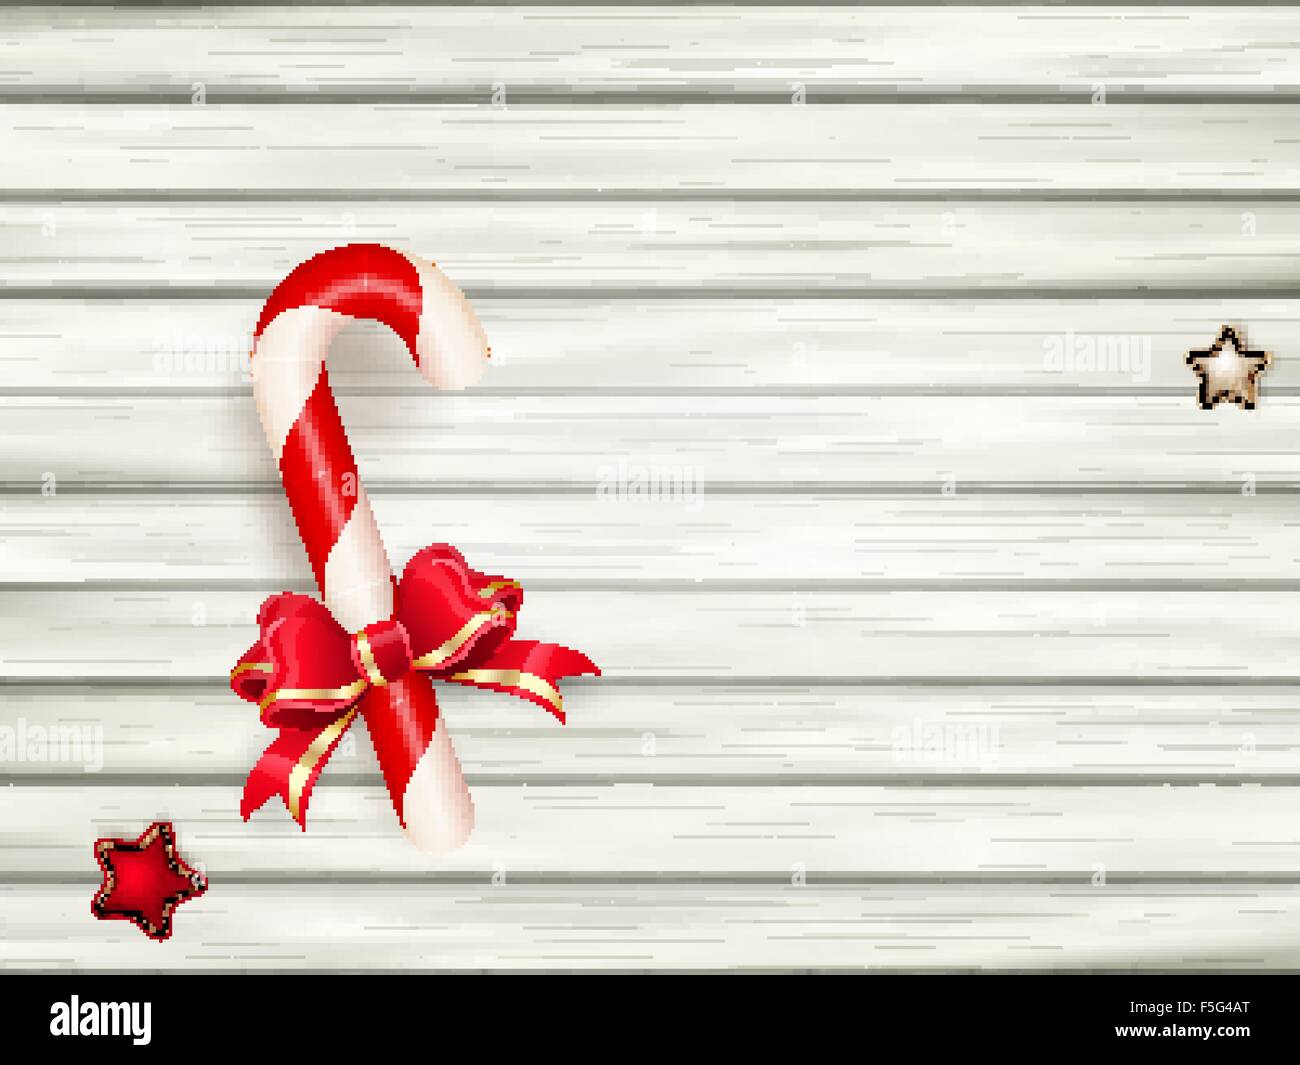 Candy cane on wooden board. EPS 10 Stock Vector